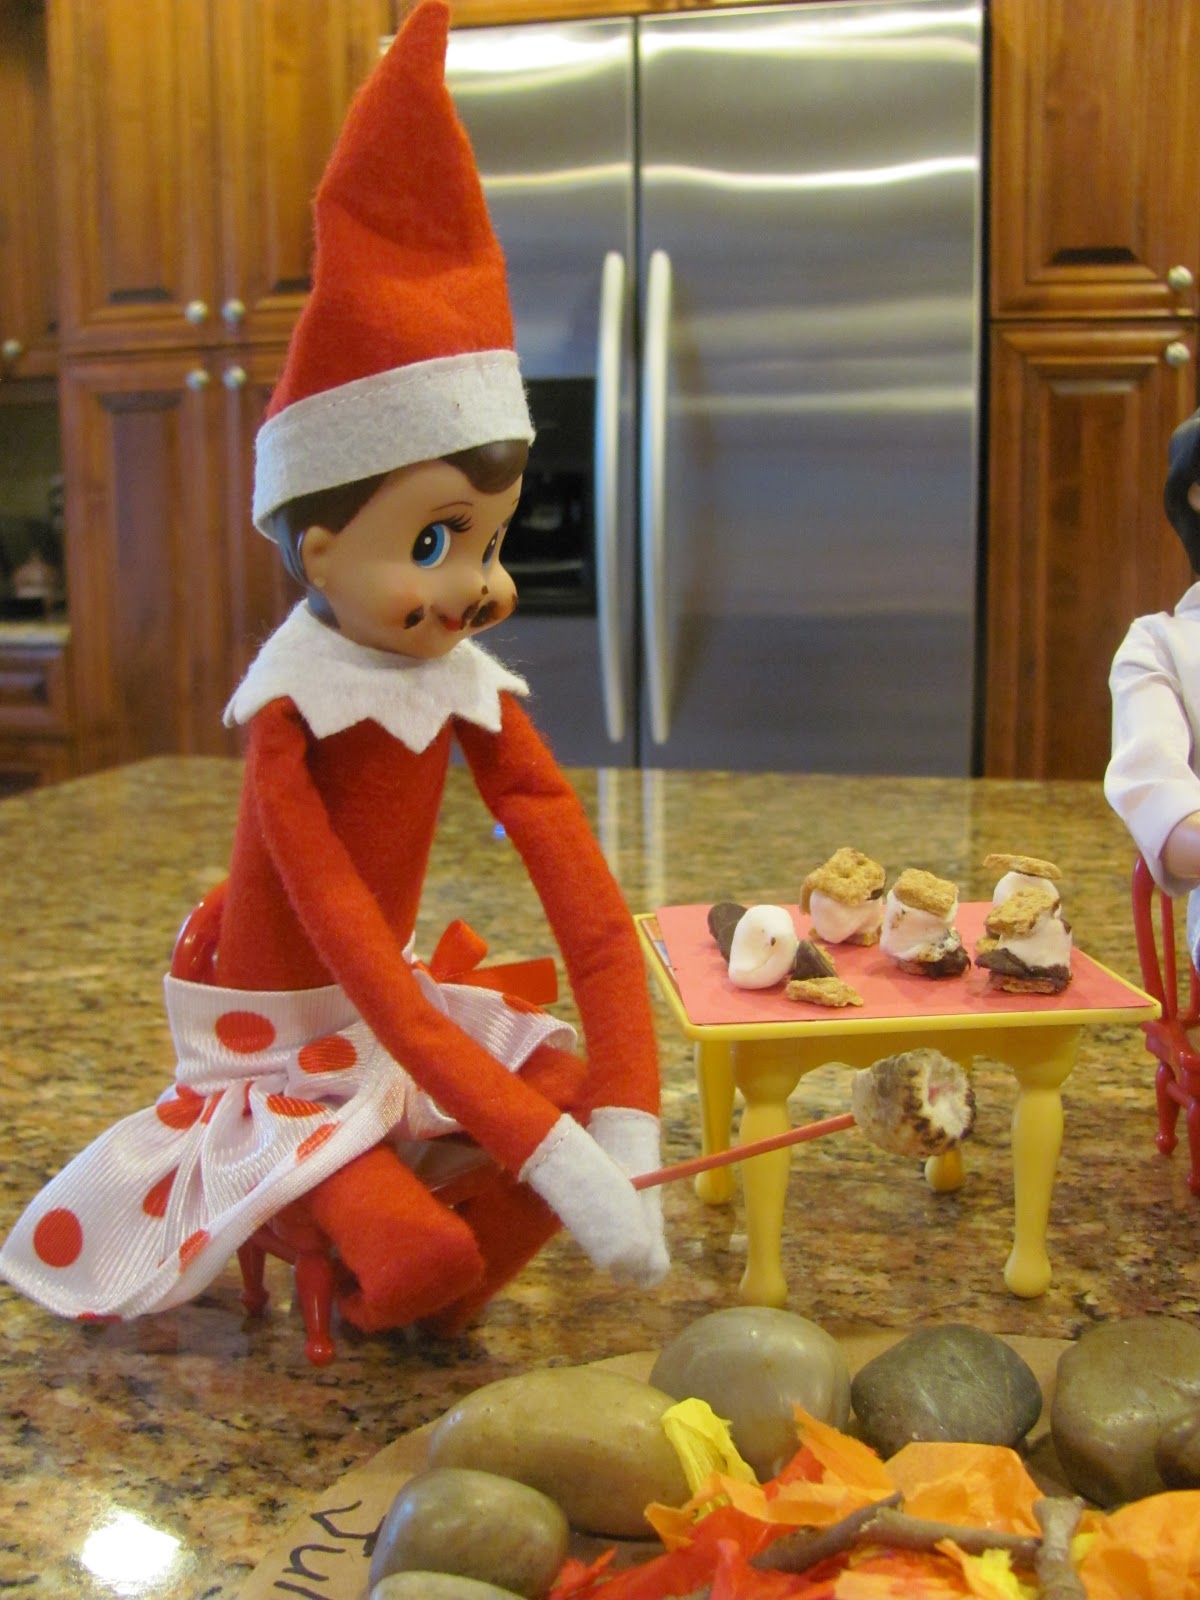 A Mommy's Adventures: Our Elf on the Shelf has Arrived